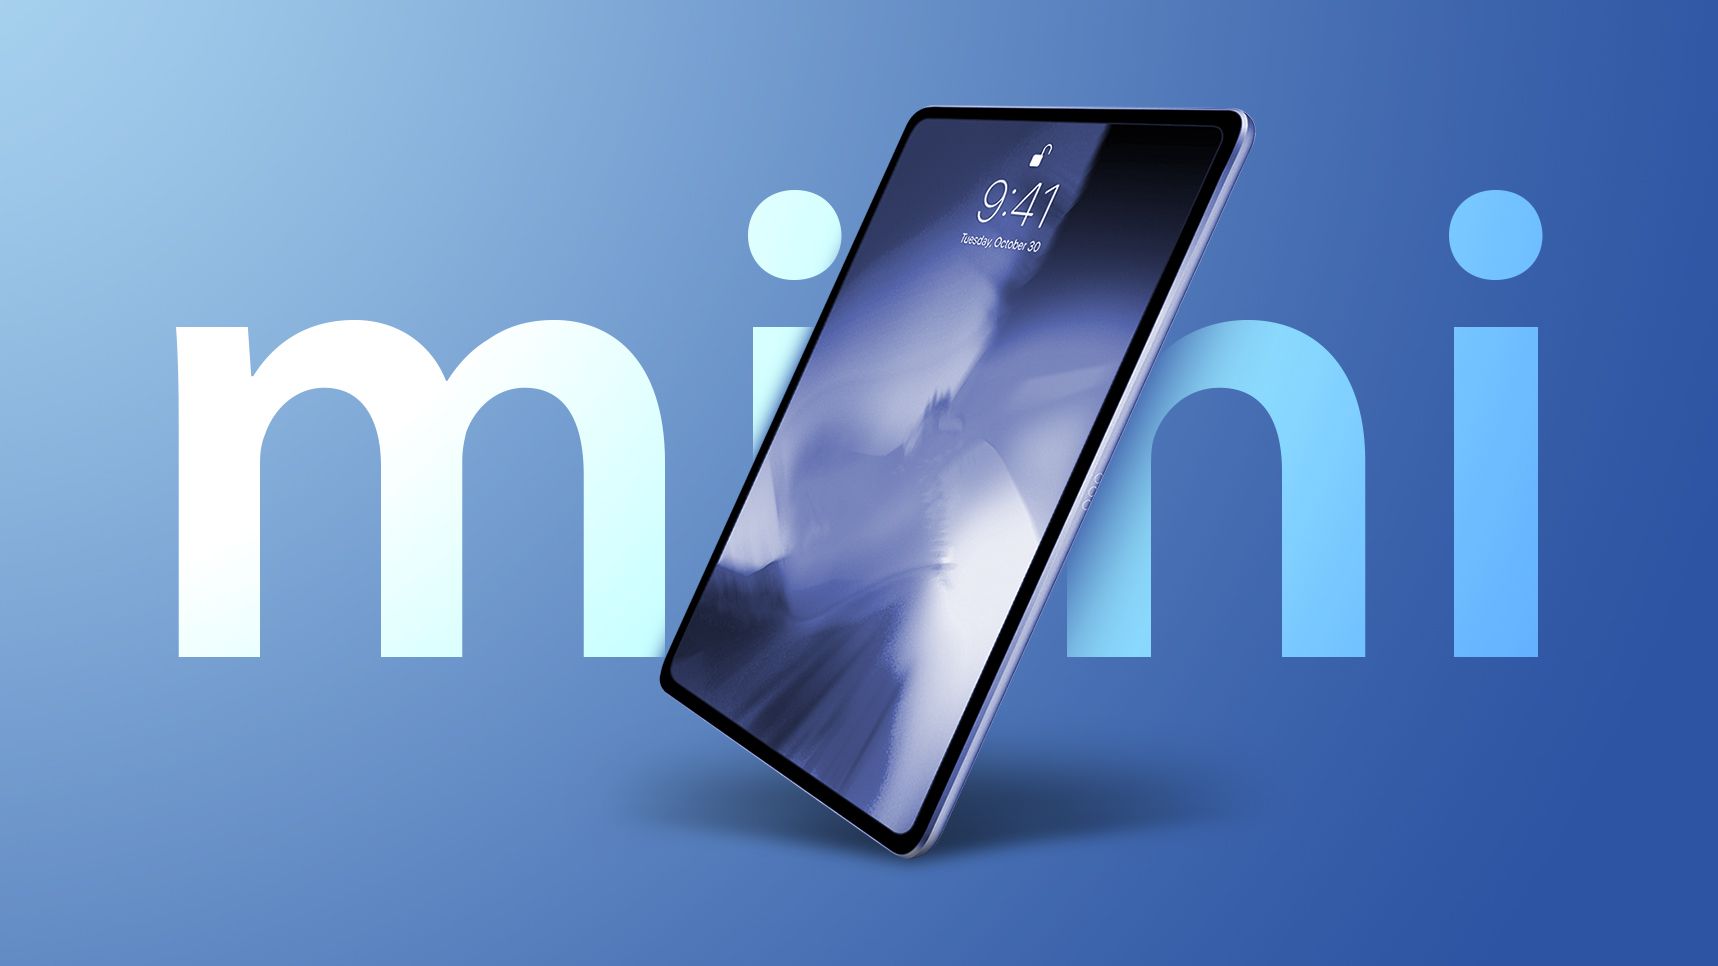 Sketchy rumor claims ‘iPad Mini Pro’ will be launched in the second half of 2021